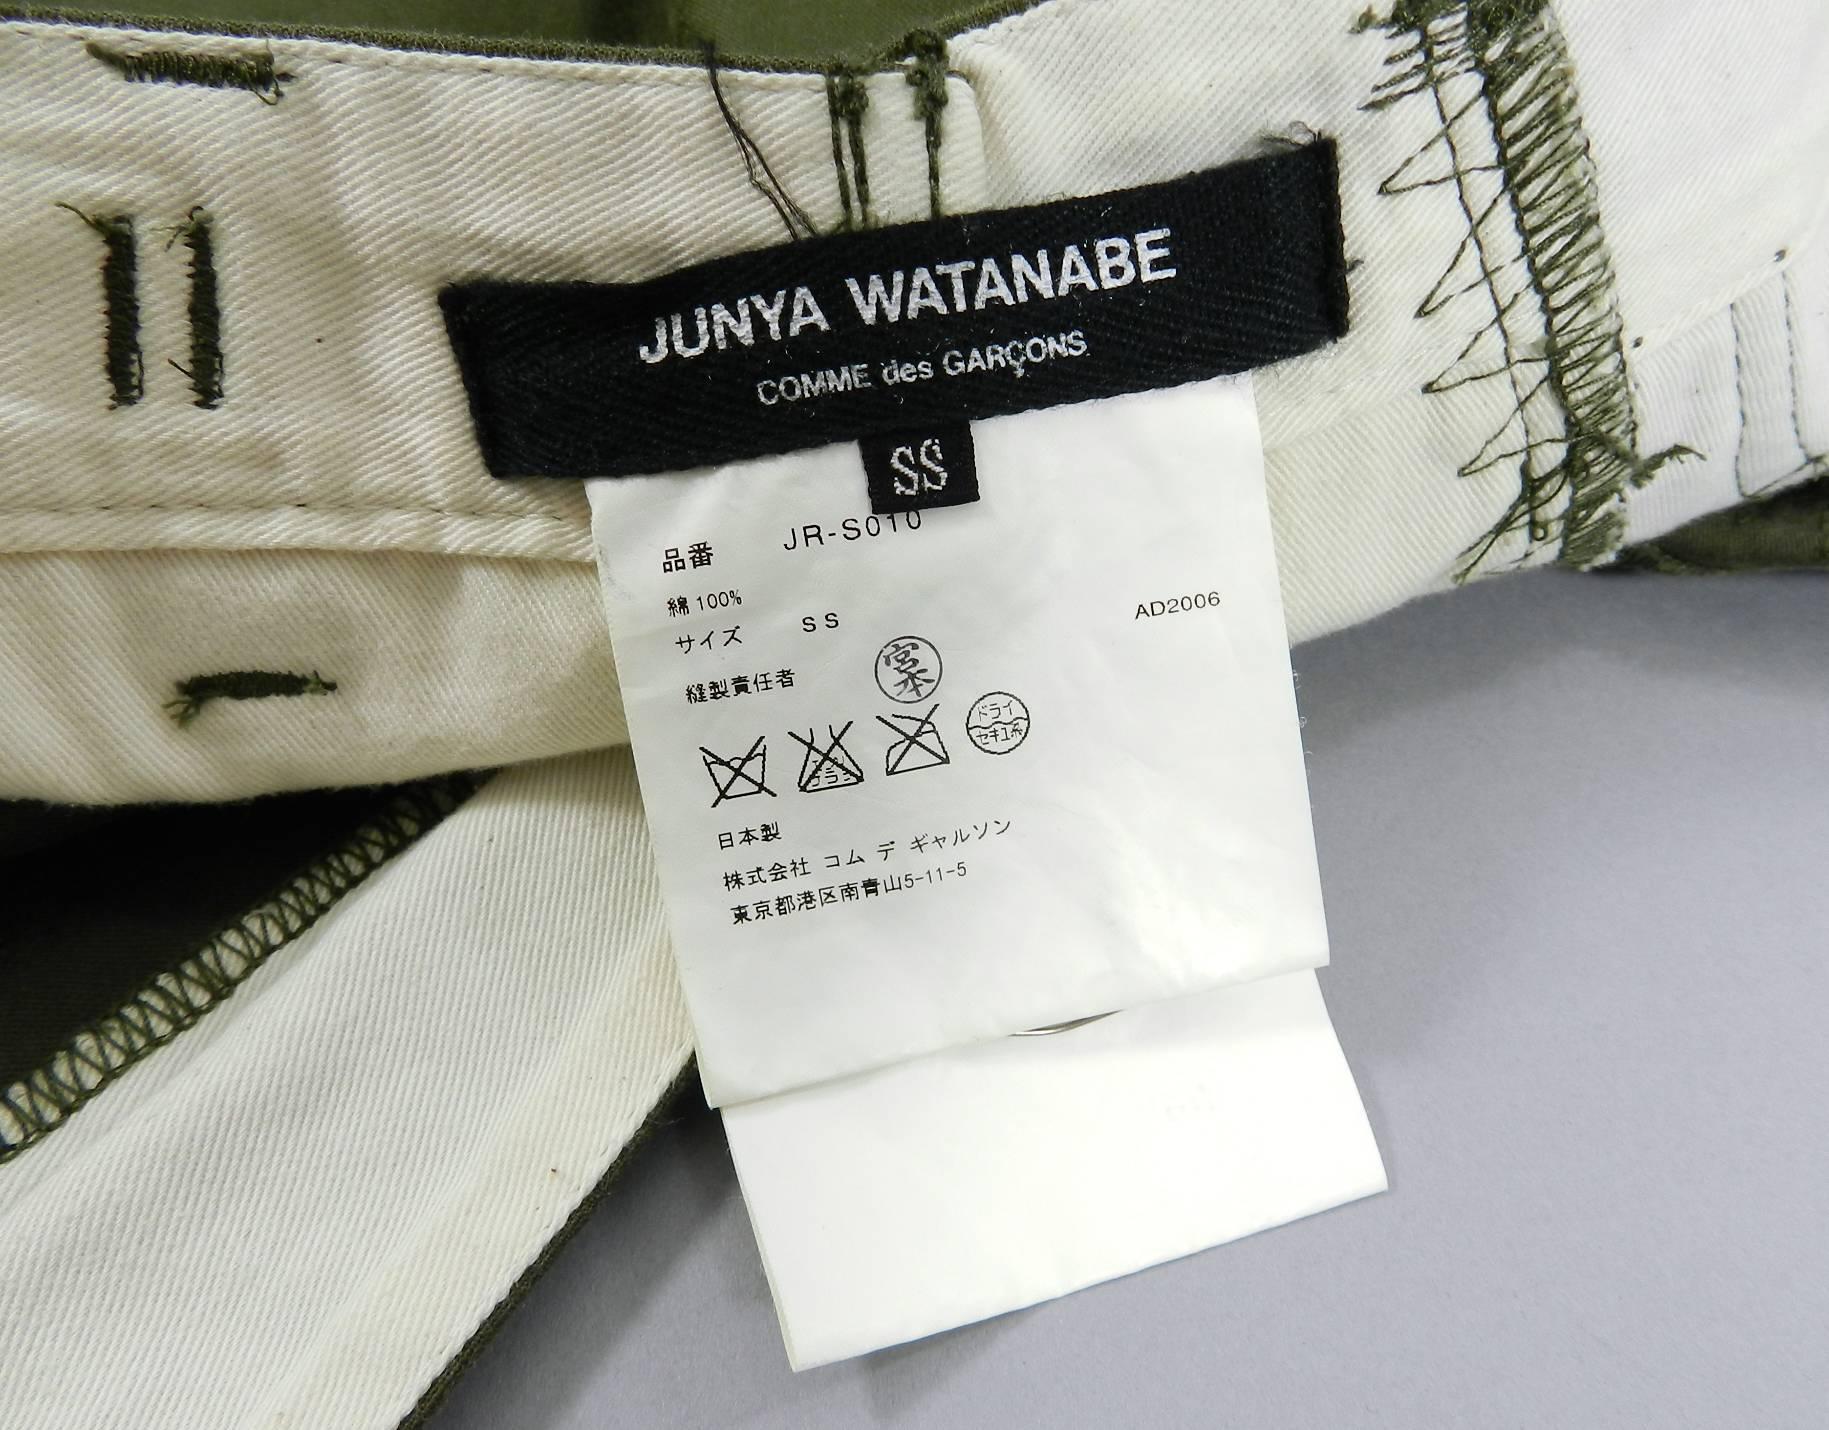 junya watanabe comme des garcons Deconstructed Army skirt 1